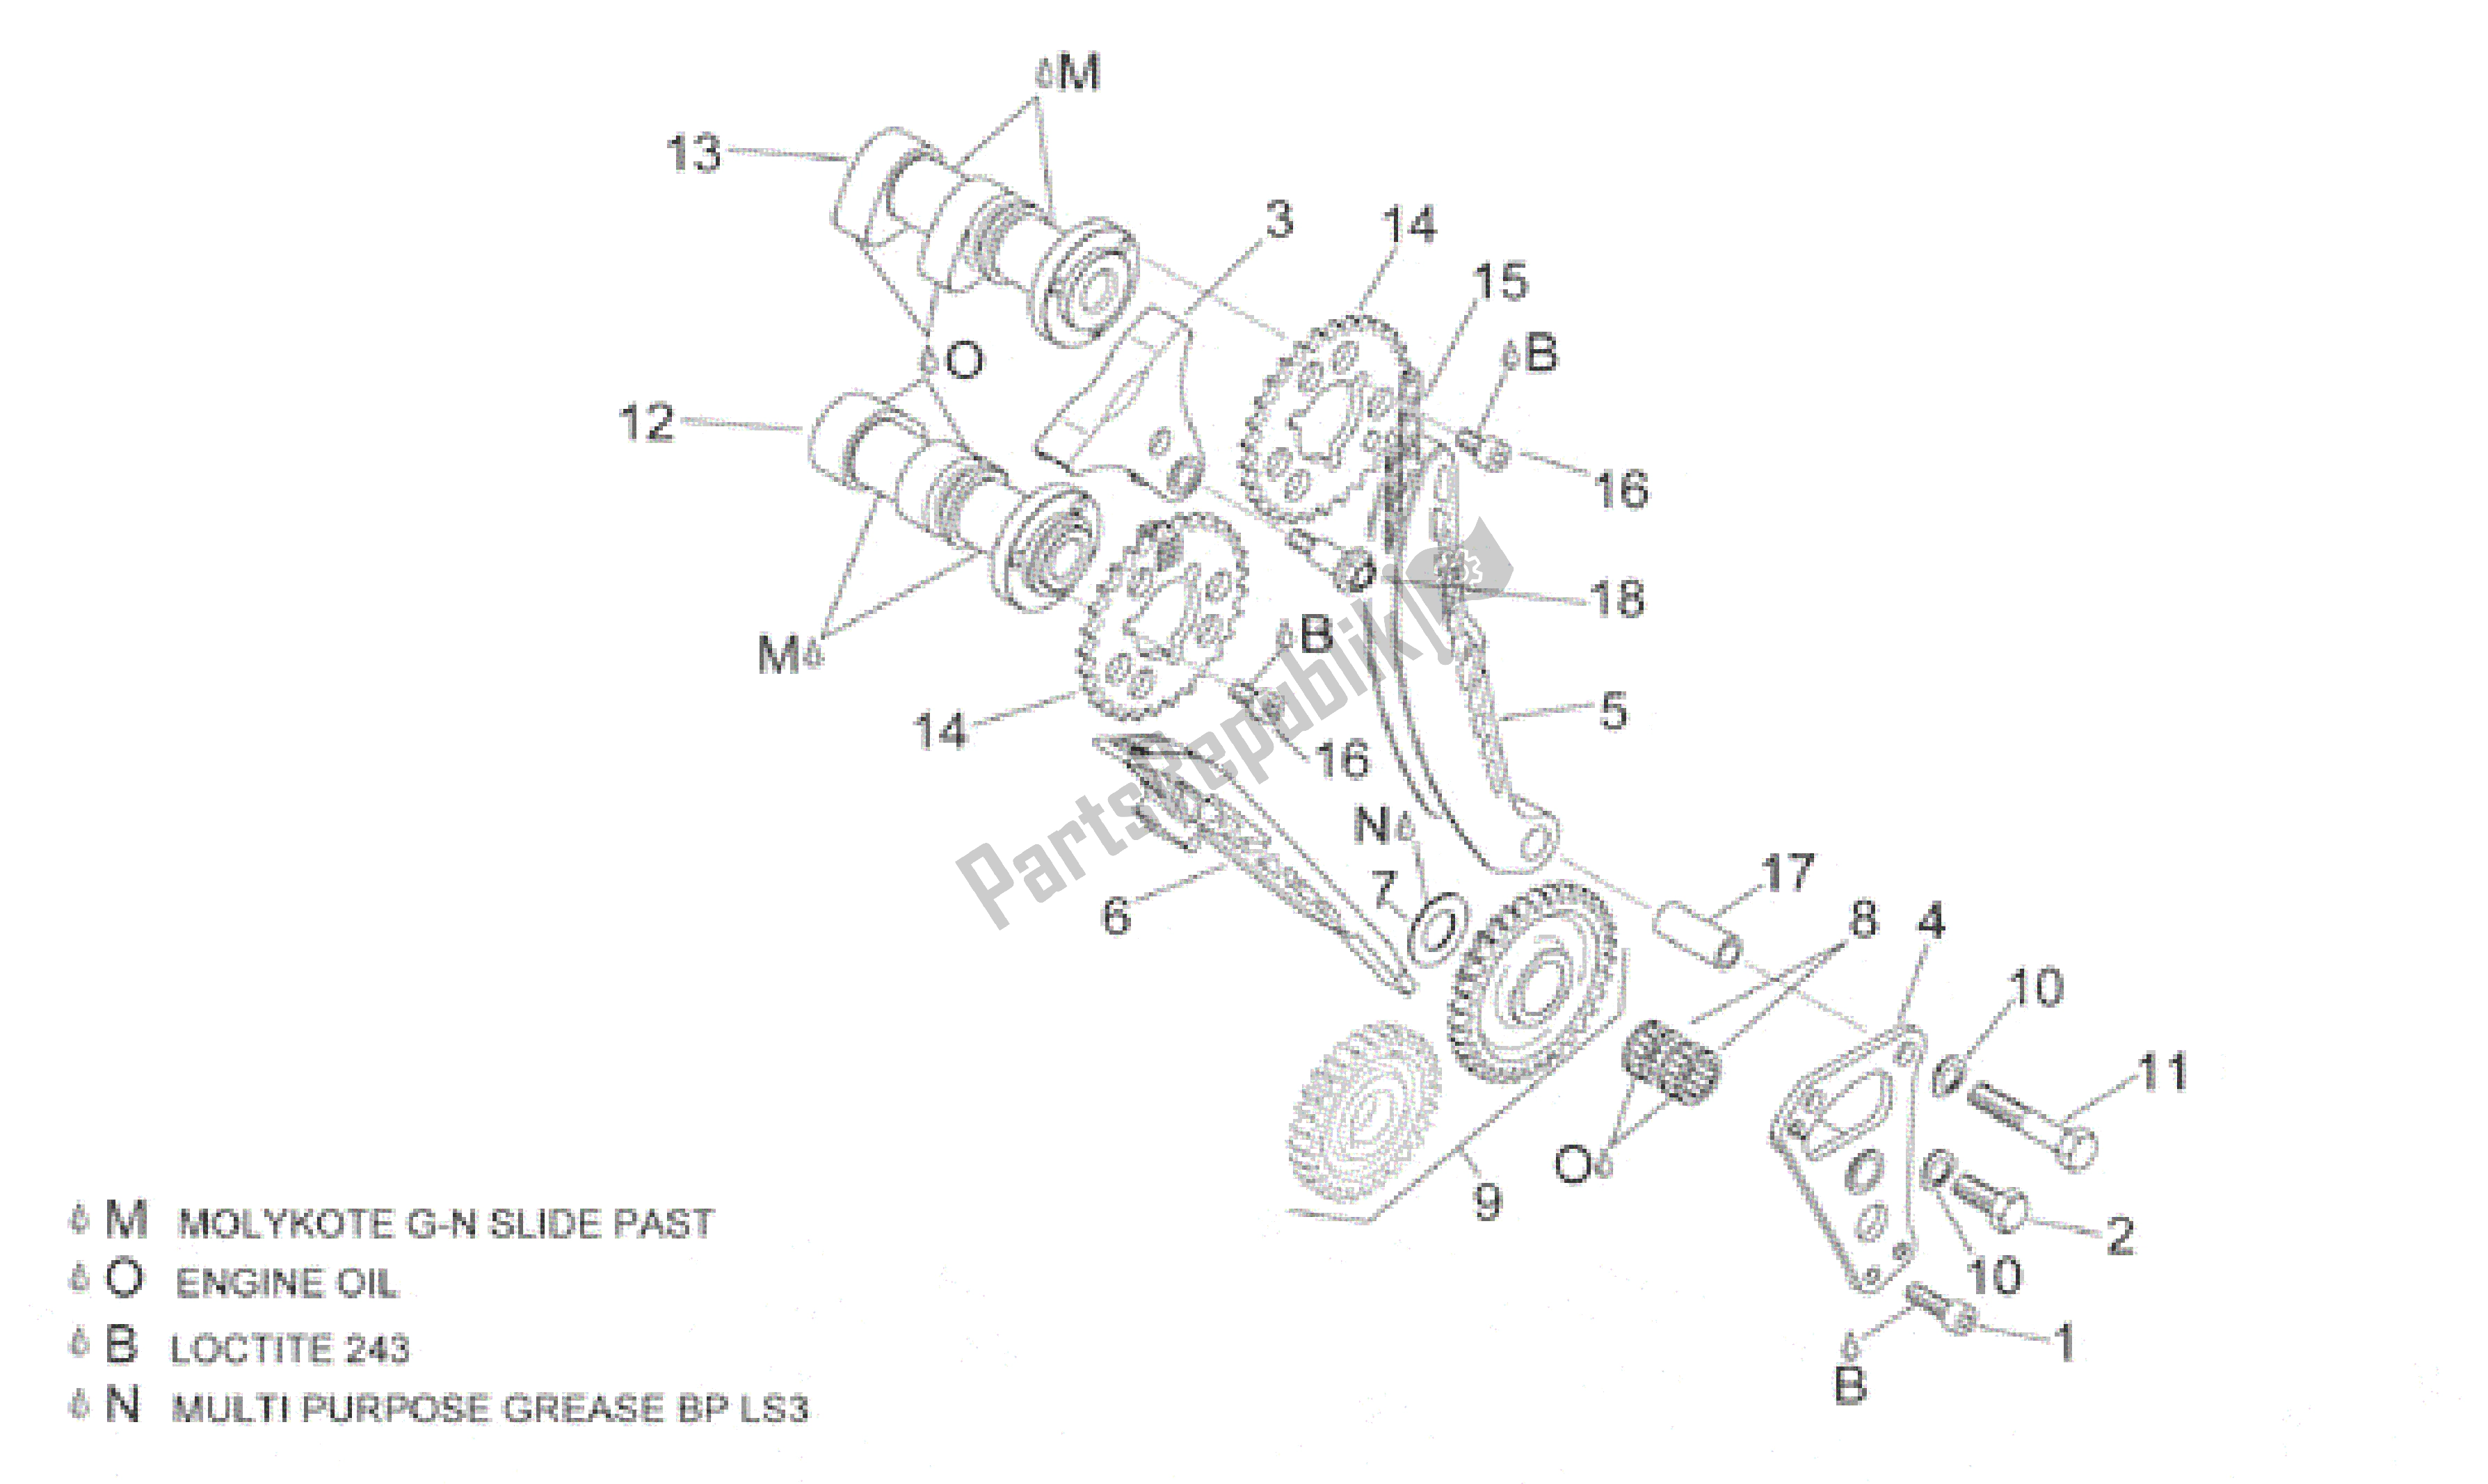 All parts for the Front Cylinder Timing System of the Aprilia Caponord 1000 2001